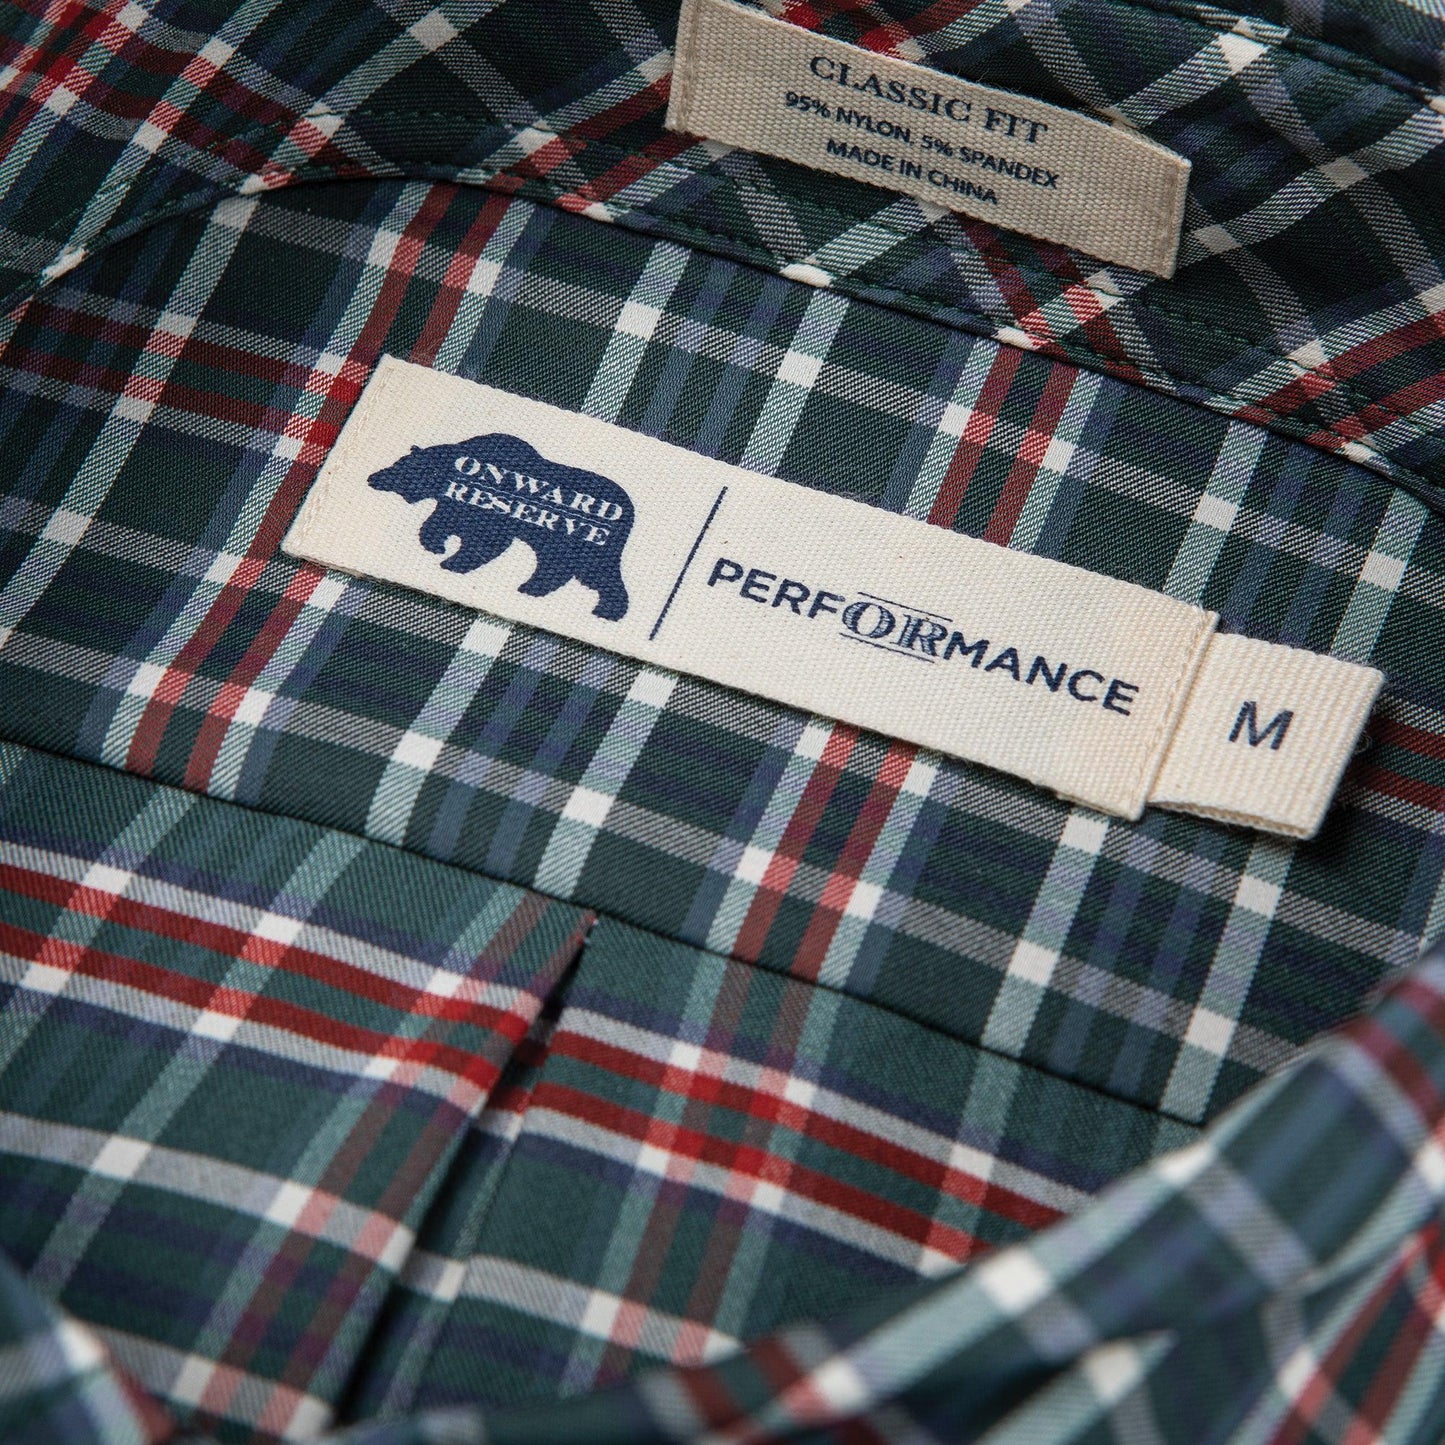 Coolidge Classic Fit Performance Button Down - Onward Reserve